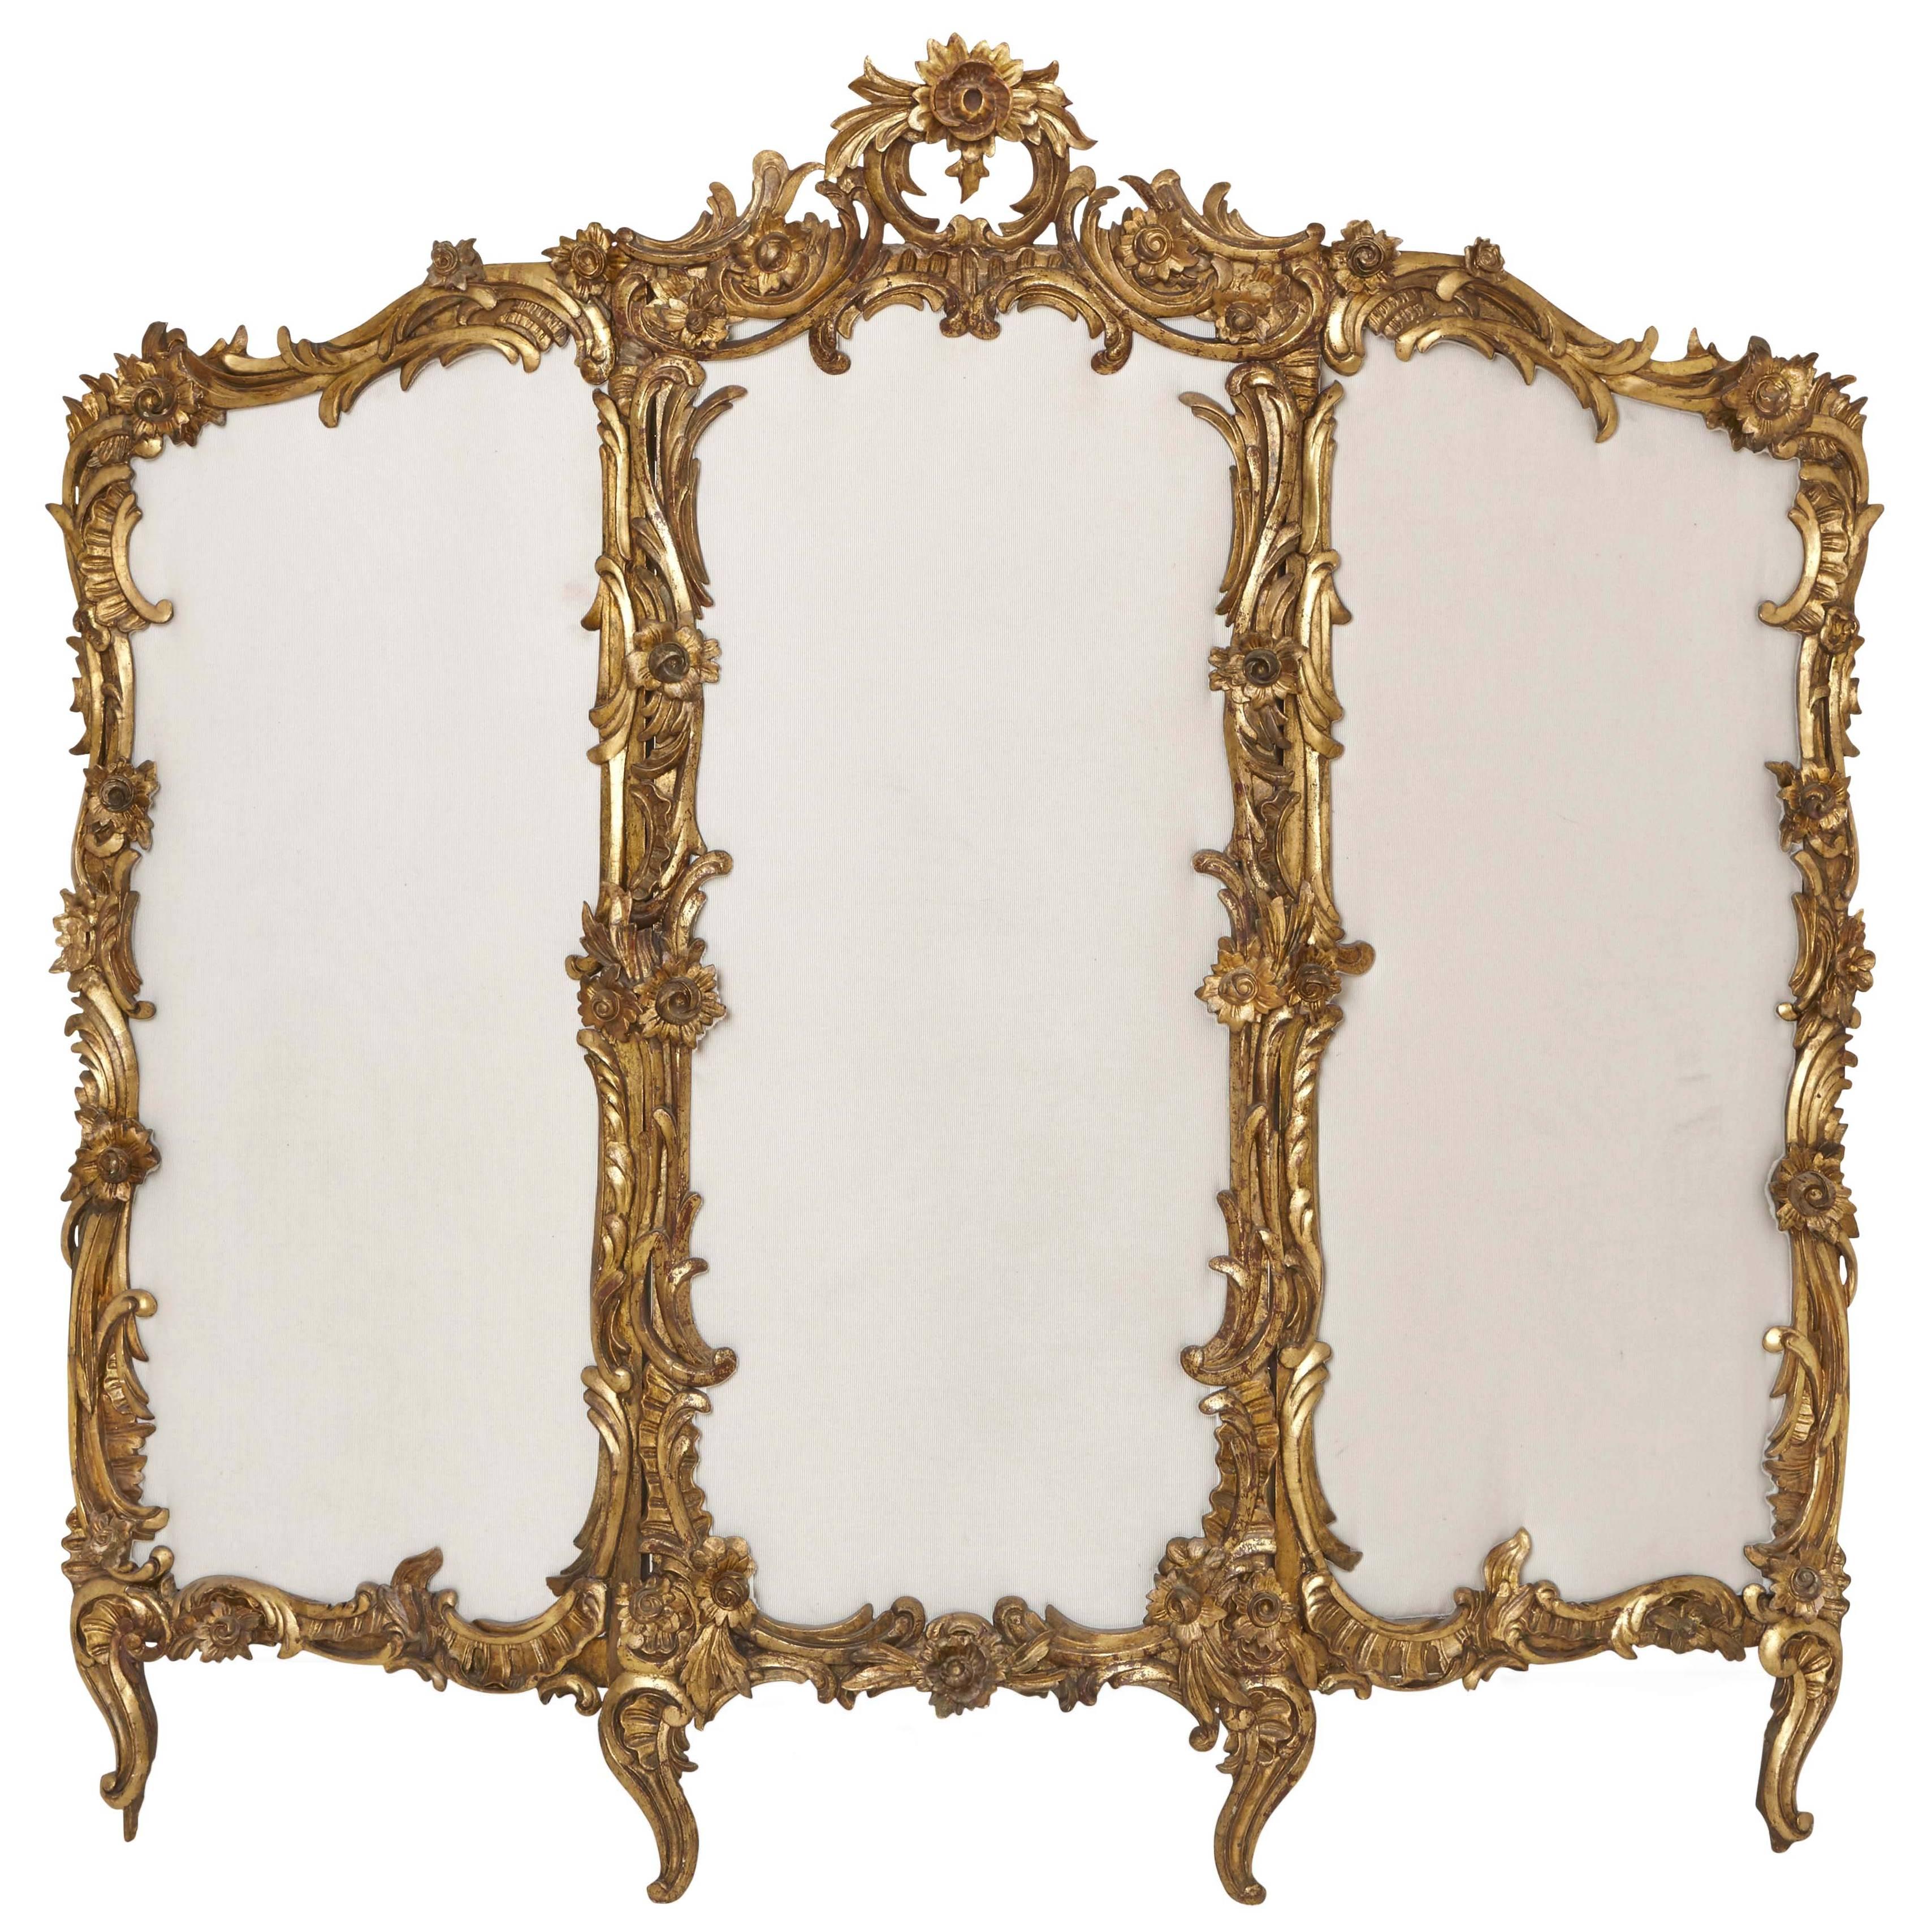 Carved Giltwood Rococo Style Antique Folding Screen